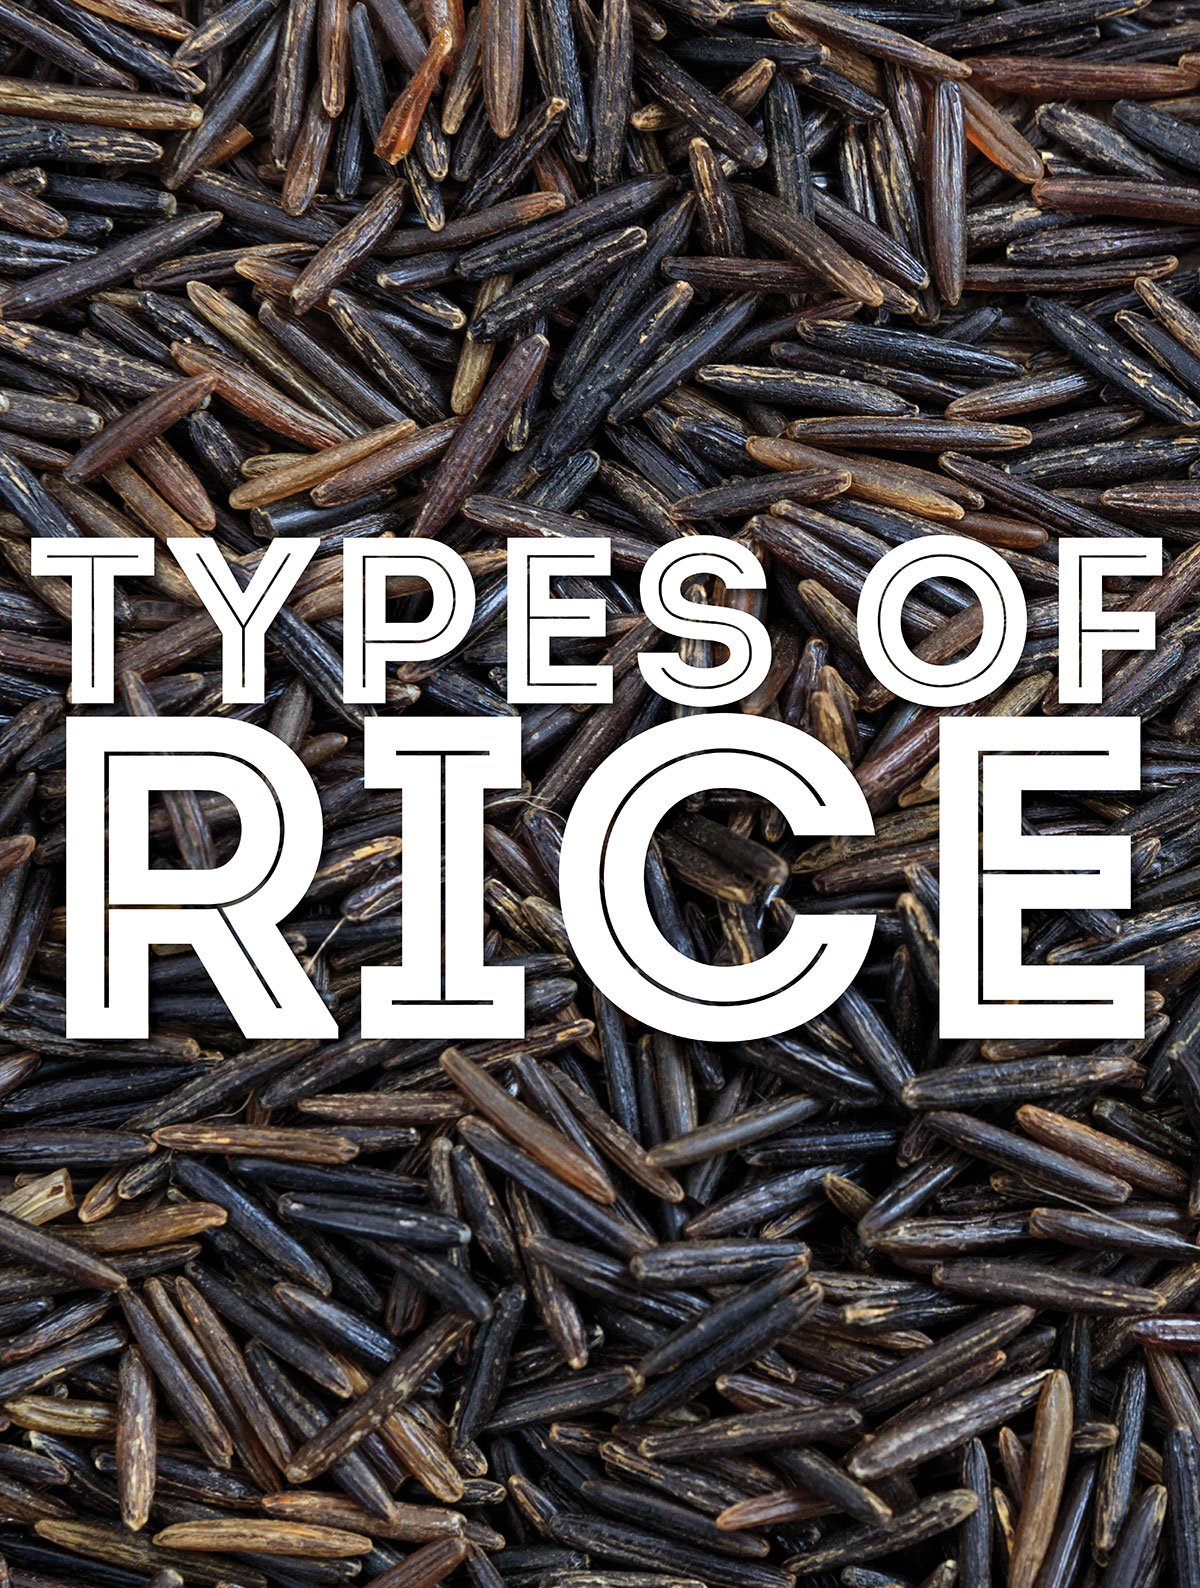 Collage that says "types of rice".